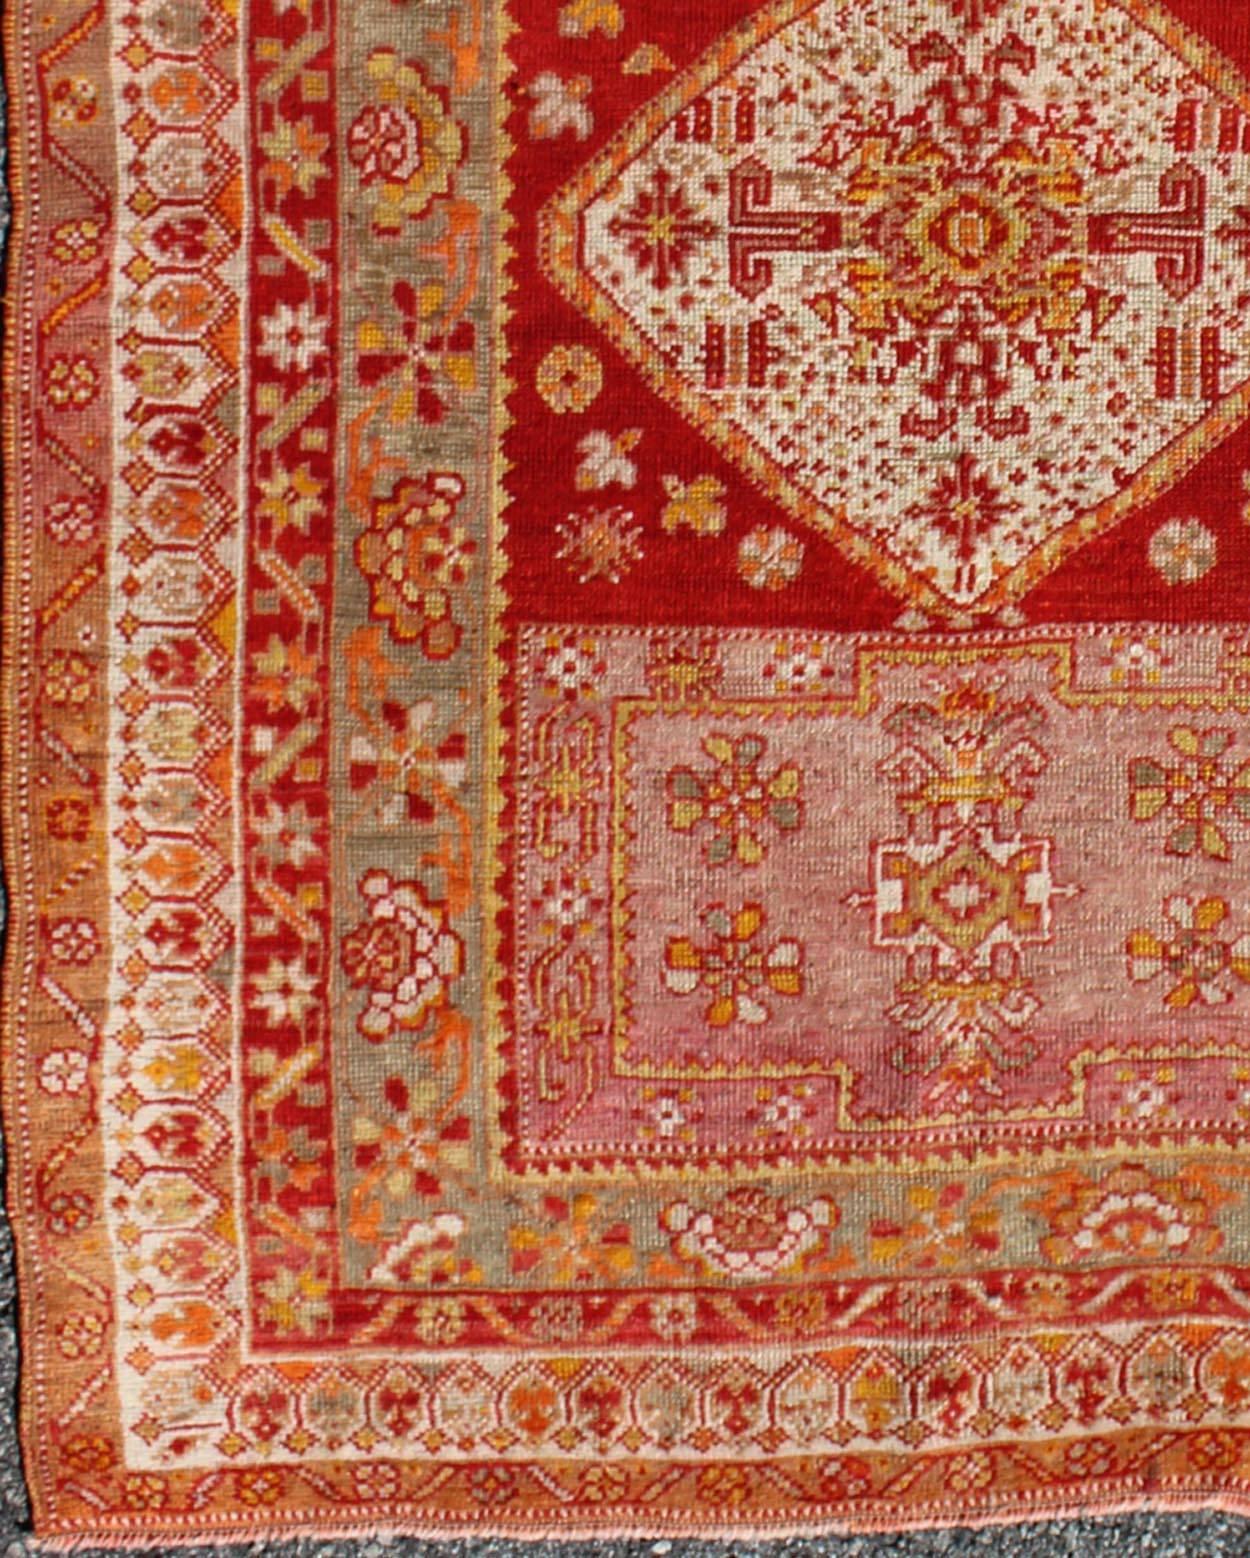 Antique Turkish Oushak Rug With Colorful Flowing Floral and Geometric Motifs in red, green, pink, Keivan Woven Arts/ rug/S12-0523,  origin/Turkey, antique Oushak 

Measures: 3.6 x 4.9

This antique Oushak rug features an intricate and complex design